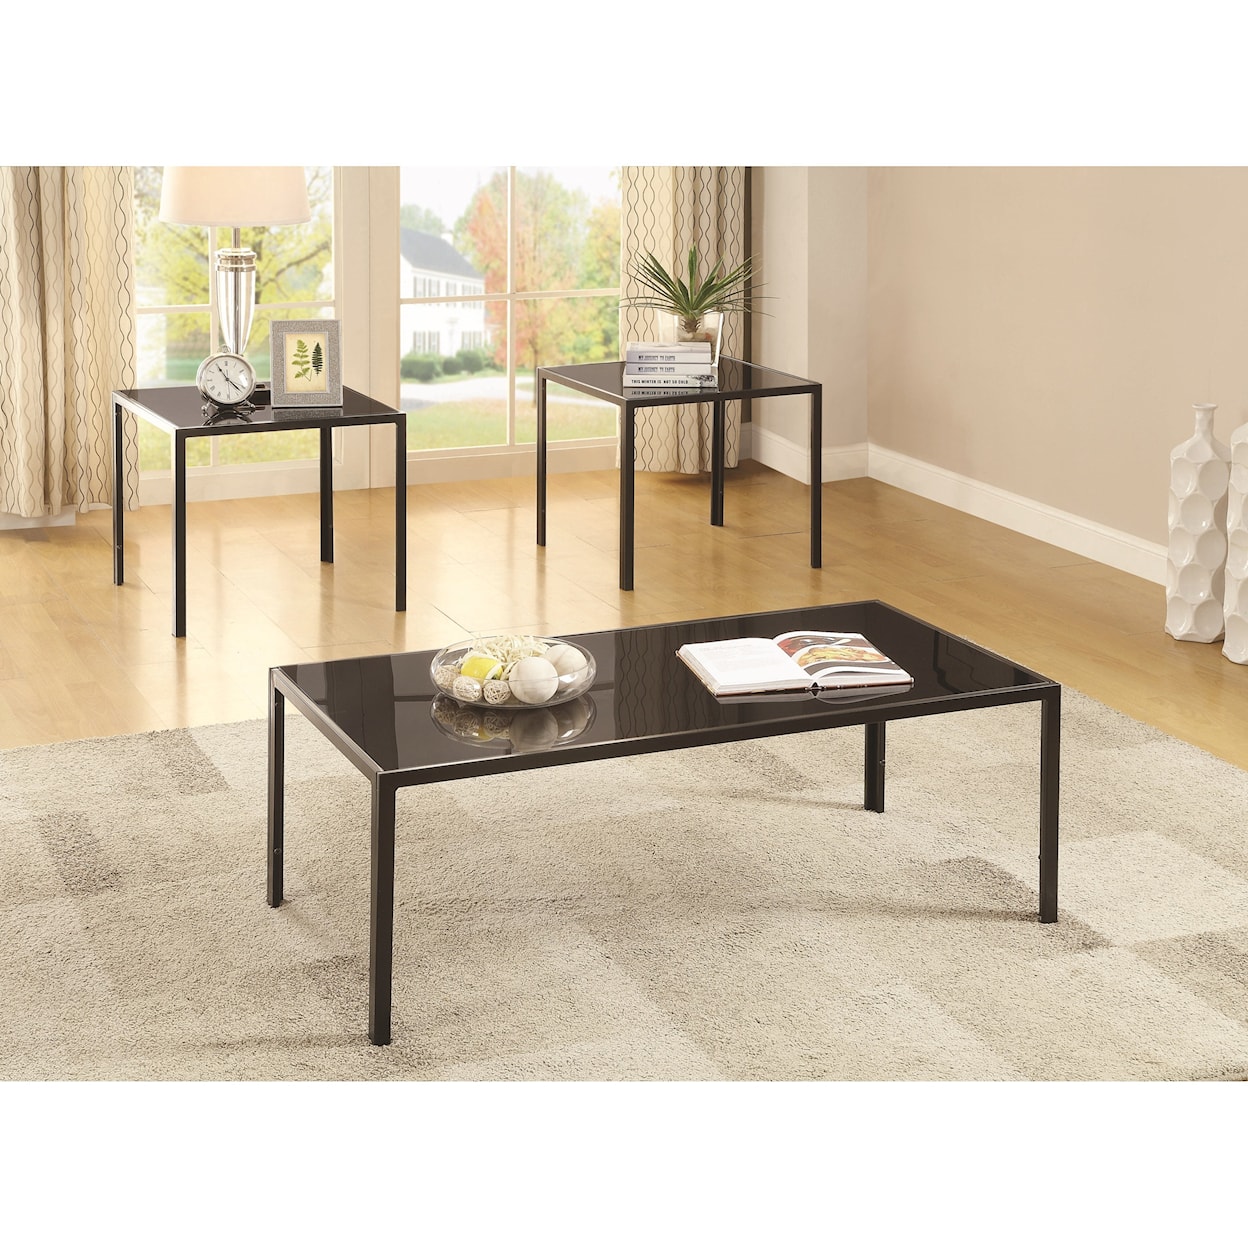 Coaster Occasional Table Sets 3 Piece Occasional Set